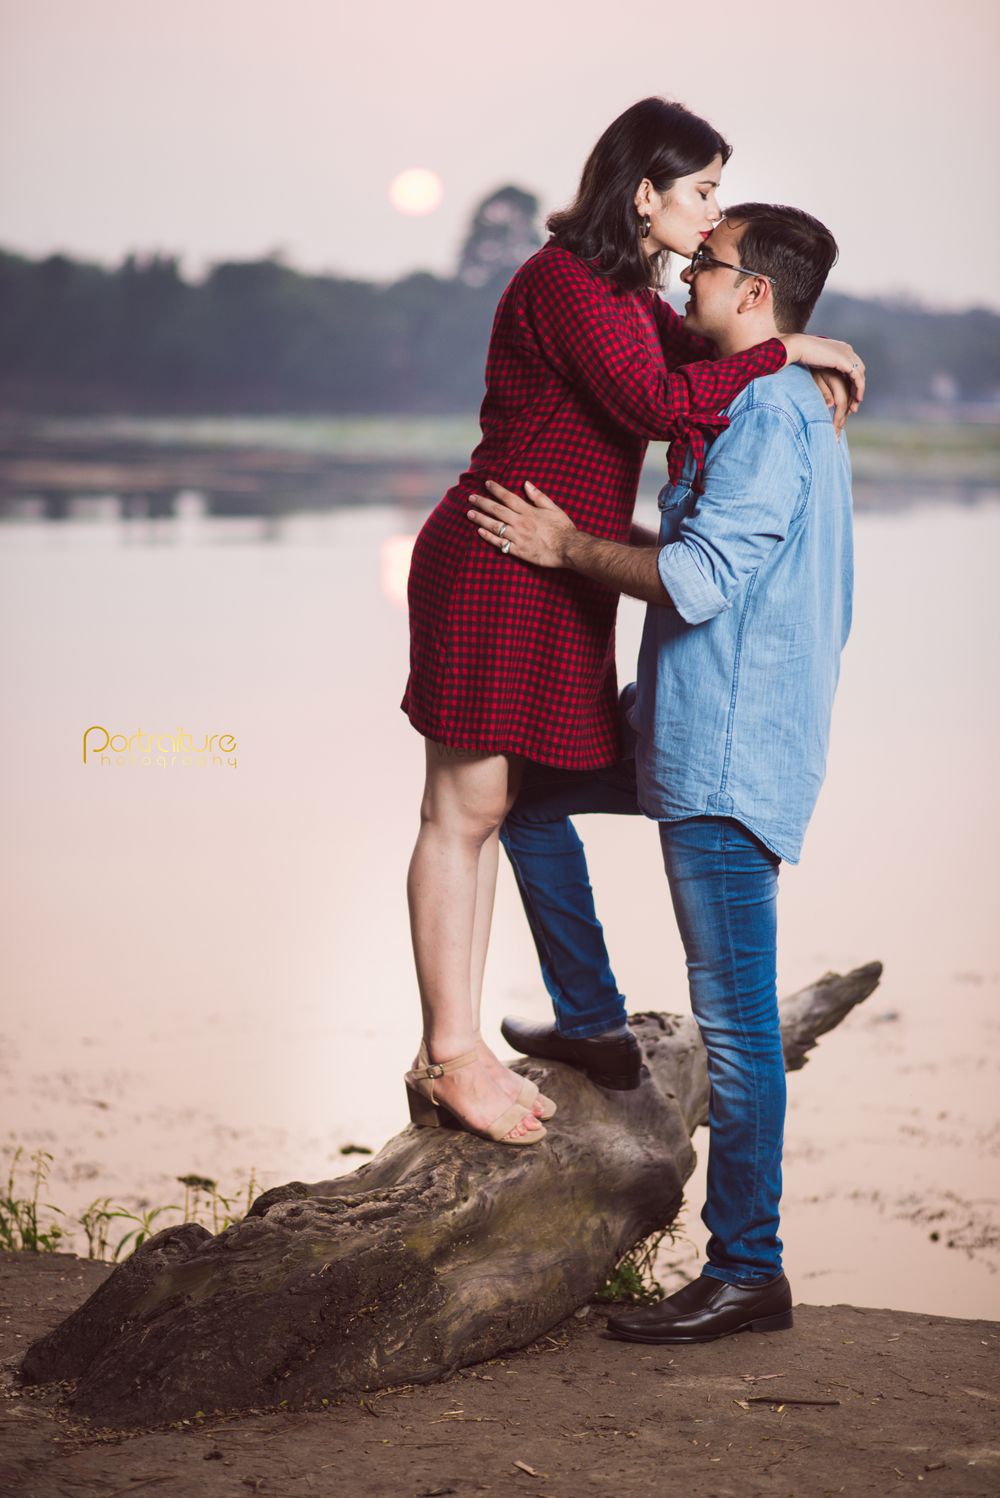 Photo From Gargee & hiranmaya - By Portraiture Photography